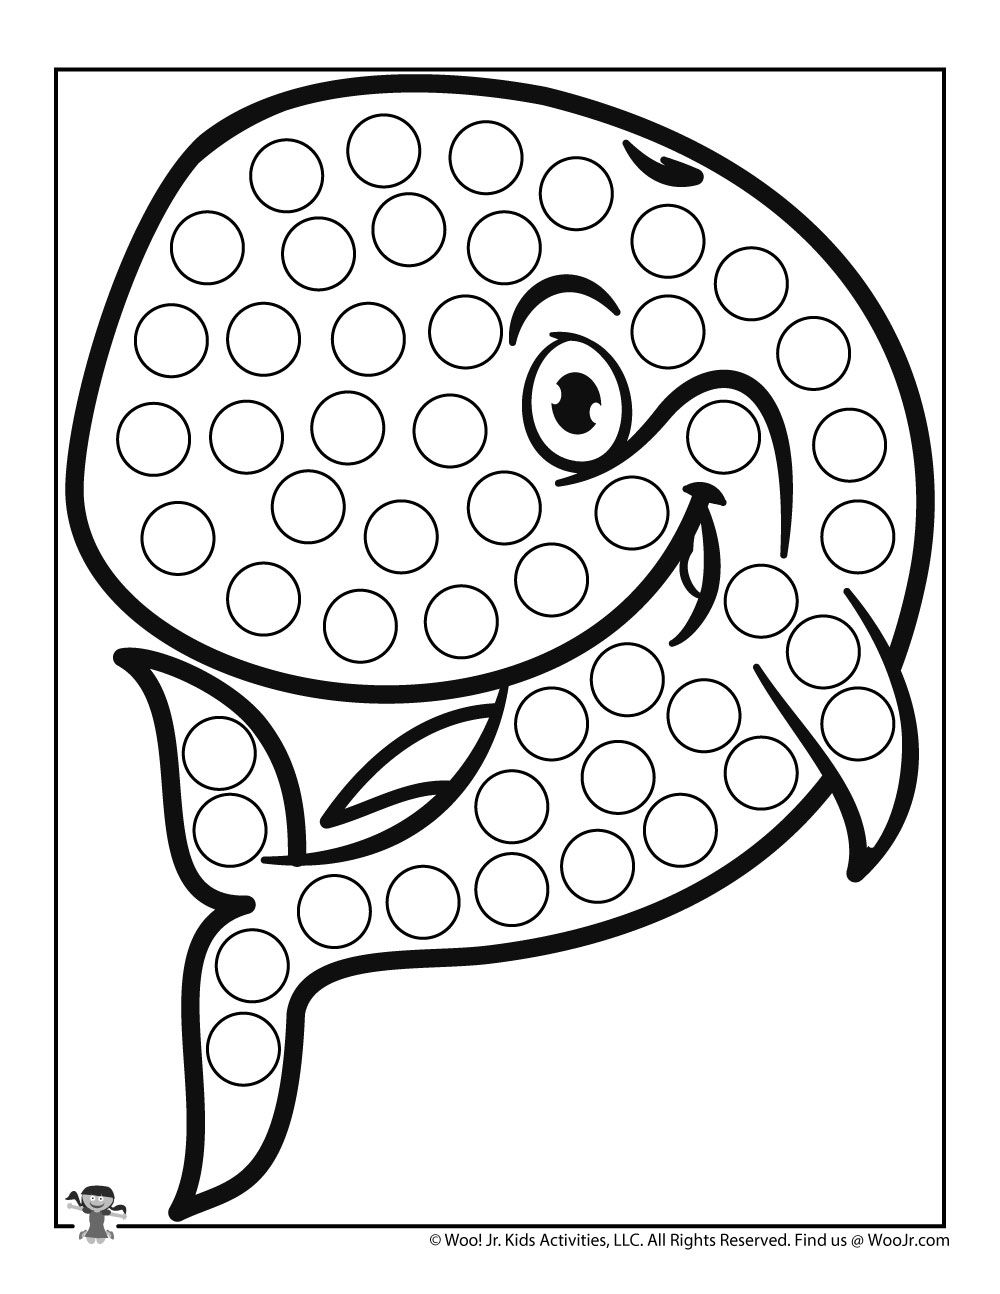 Whale Do a Dot Art Coloring Sheet for Kids